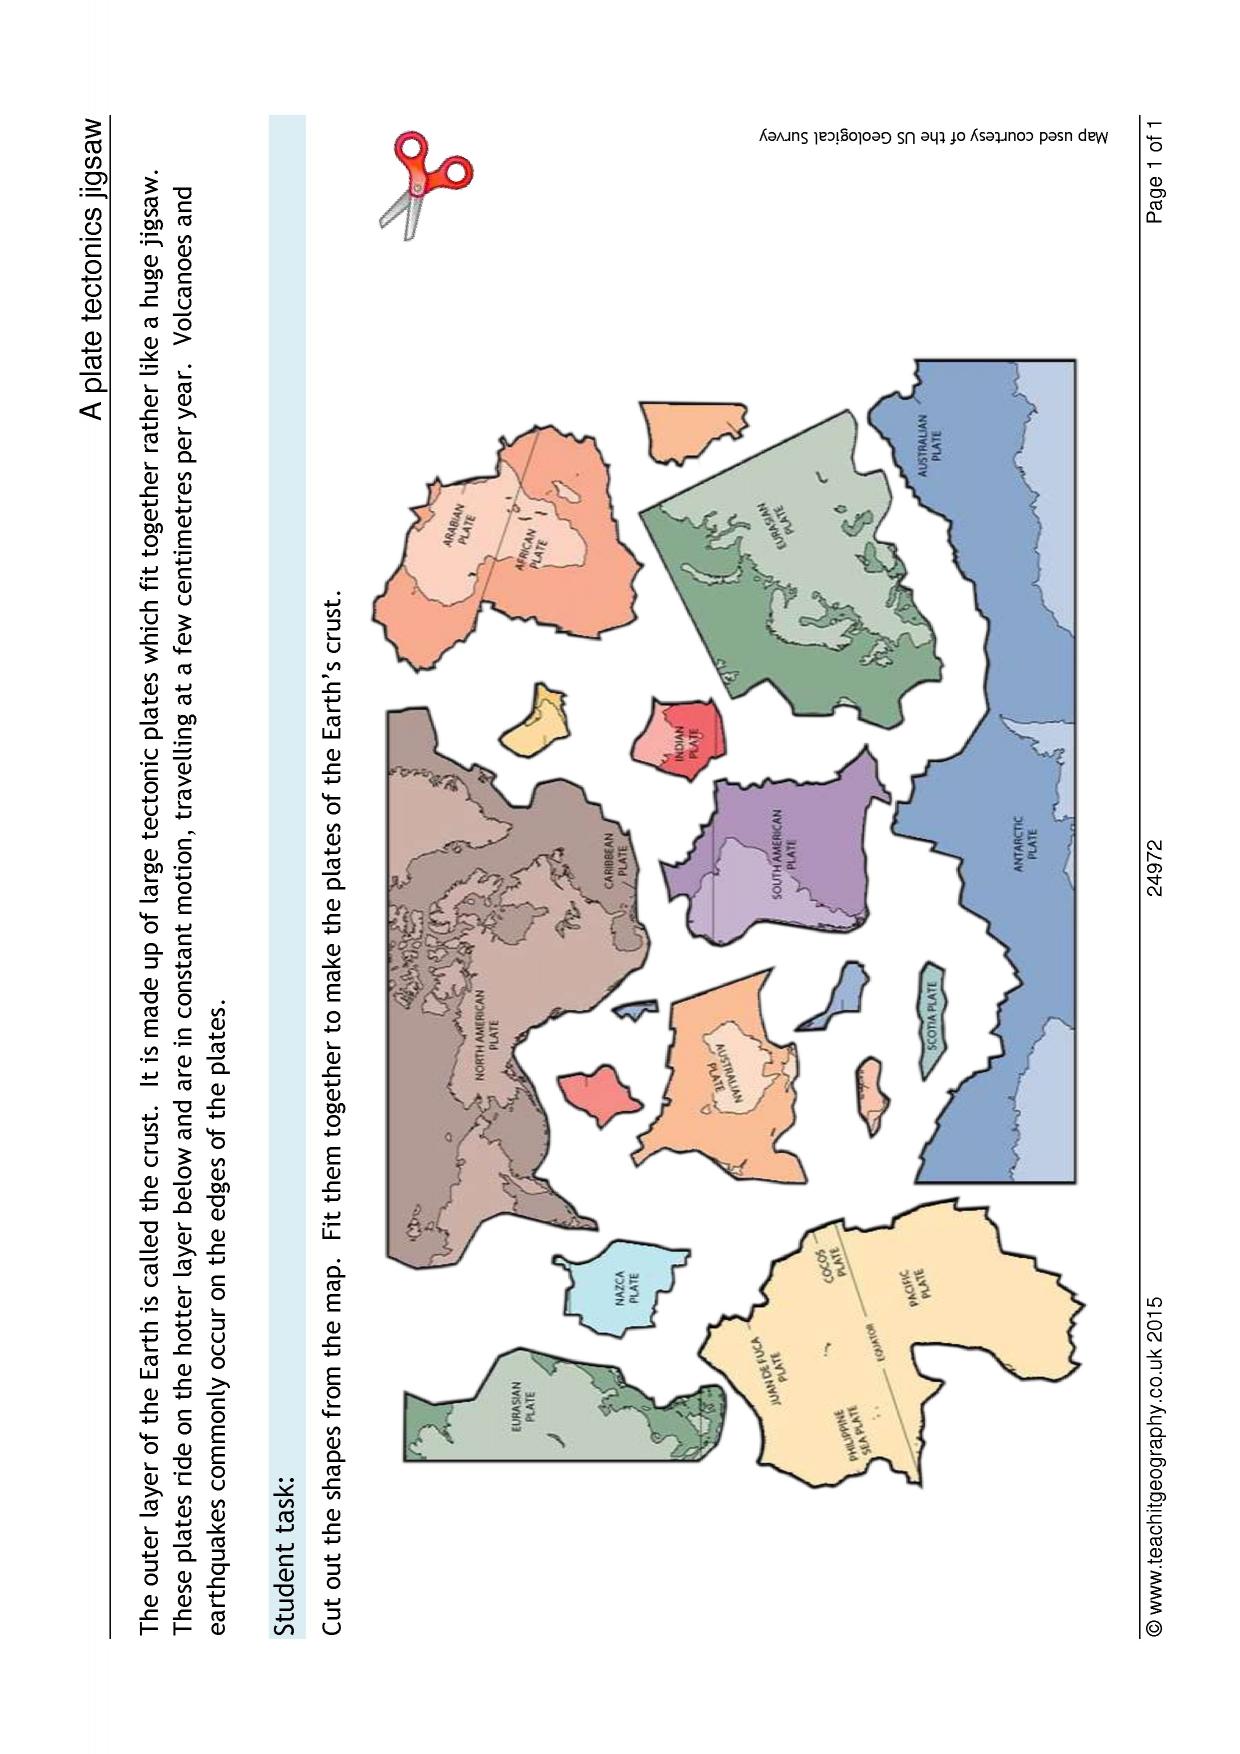 A plate tectonics jigsaw In Plate Tectonic Worksheet Answers